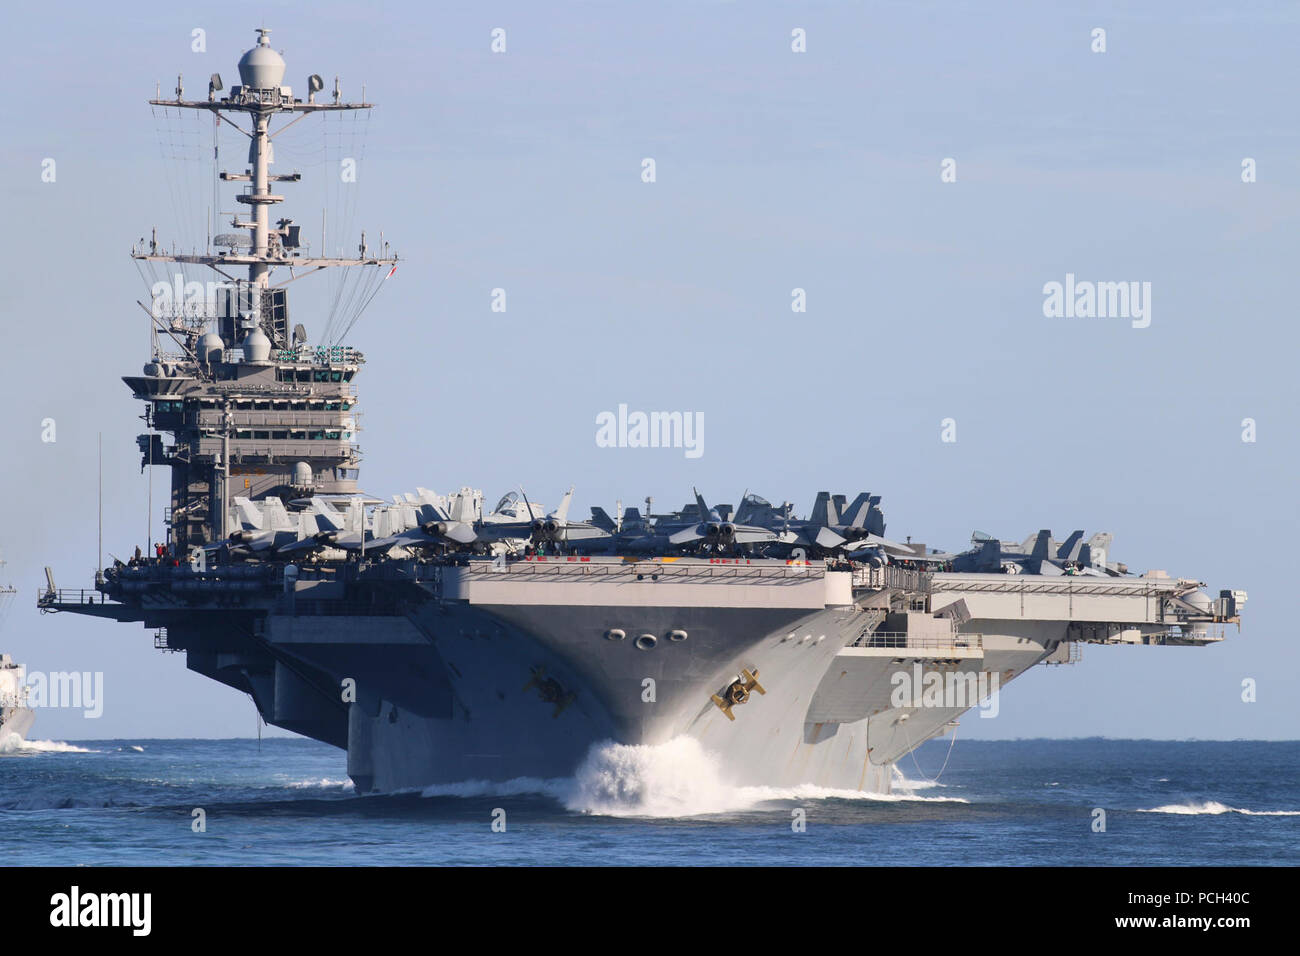 ATLANTIC OCEAN (Feb. 6, 2018) The aircraft carrier Harry S. Truman (CVN 75) participates in a composite unit training exercise (COMPTUEX). Truman is underway as a part of the Harry S. Truman Carrier Strike Group (HSTCSG) performing COMPTUEX, which evaluates the strike group’s ability as a whole to carry out sustained combat operations from the sea, ultimately certifying the HSTCSG for deployment. Stock Photo